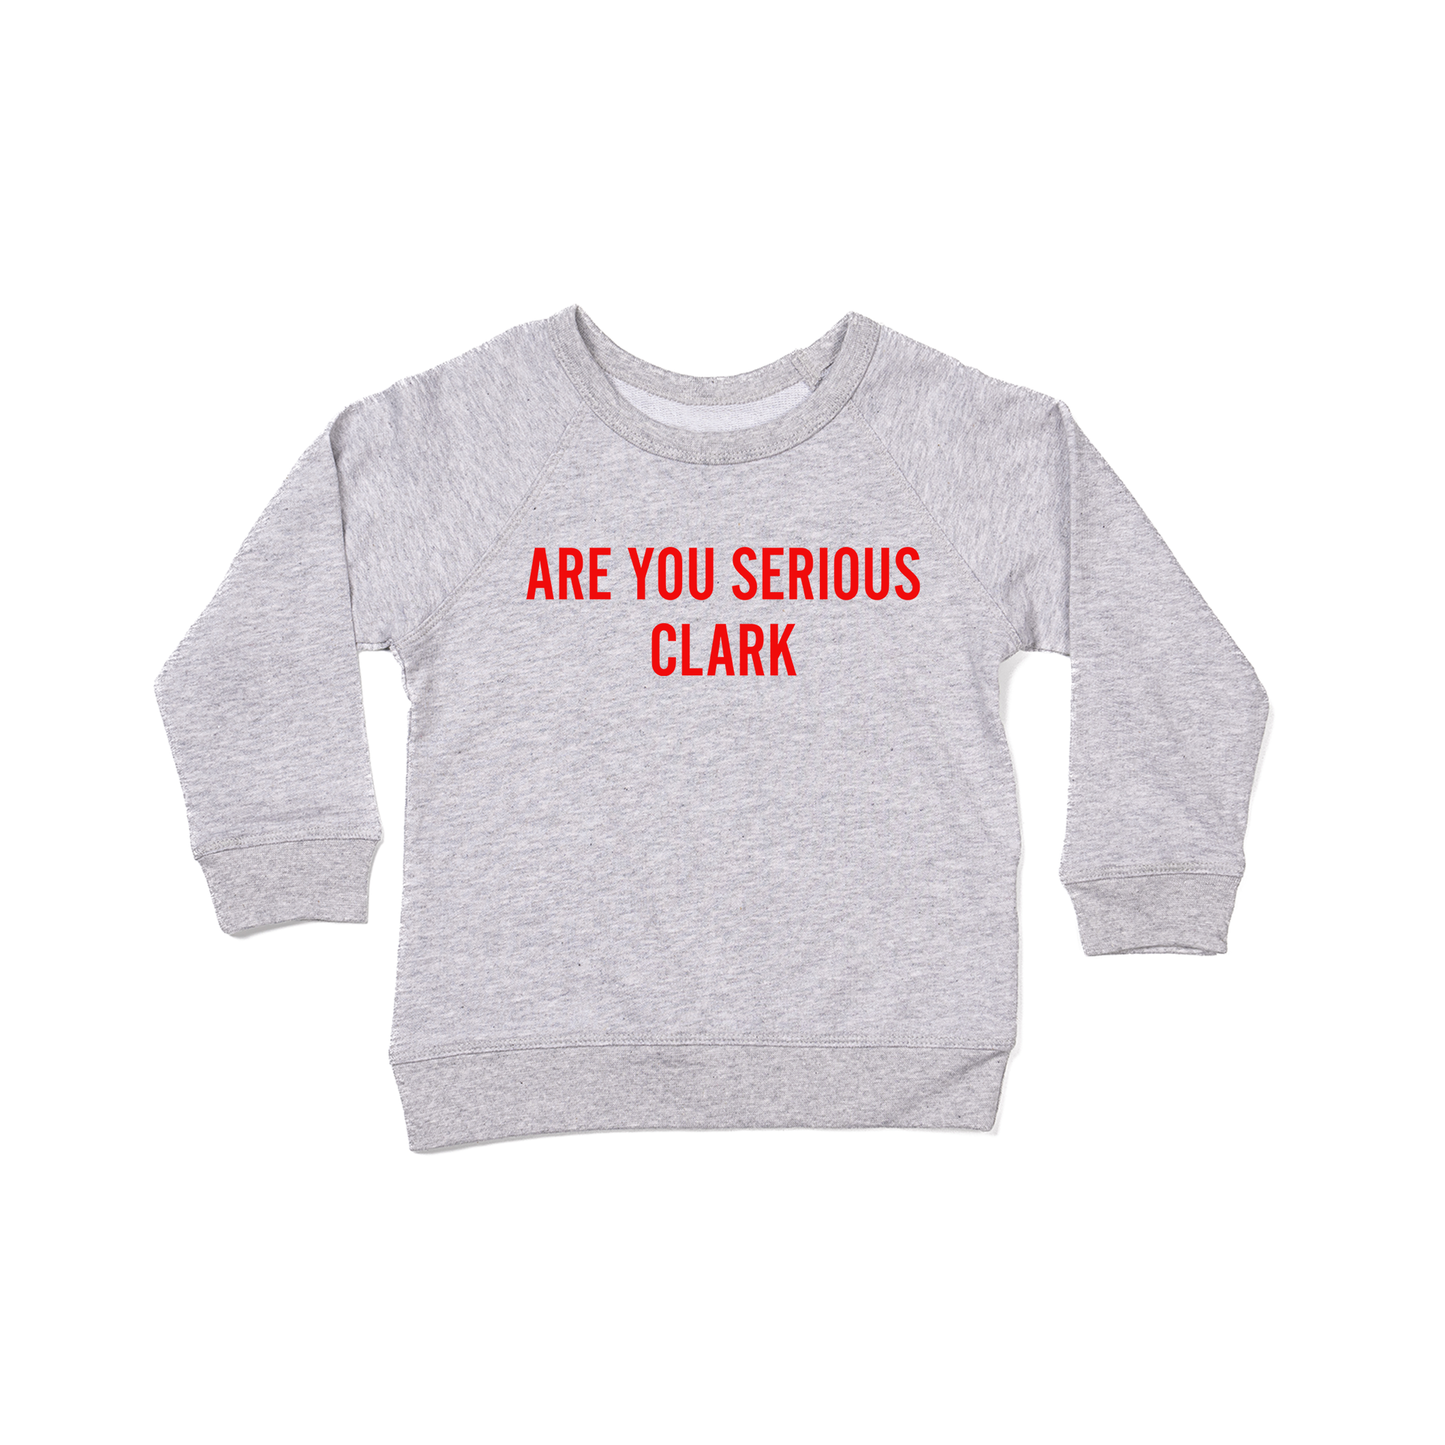 Are You Serious Clark (Red) - Kids Sweatshirt (Heather Gray)